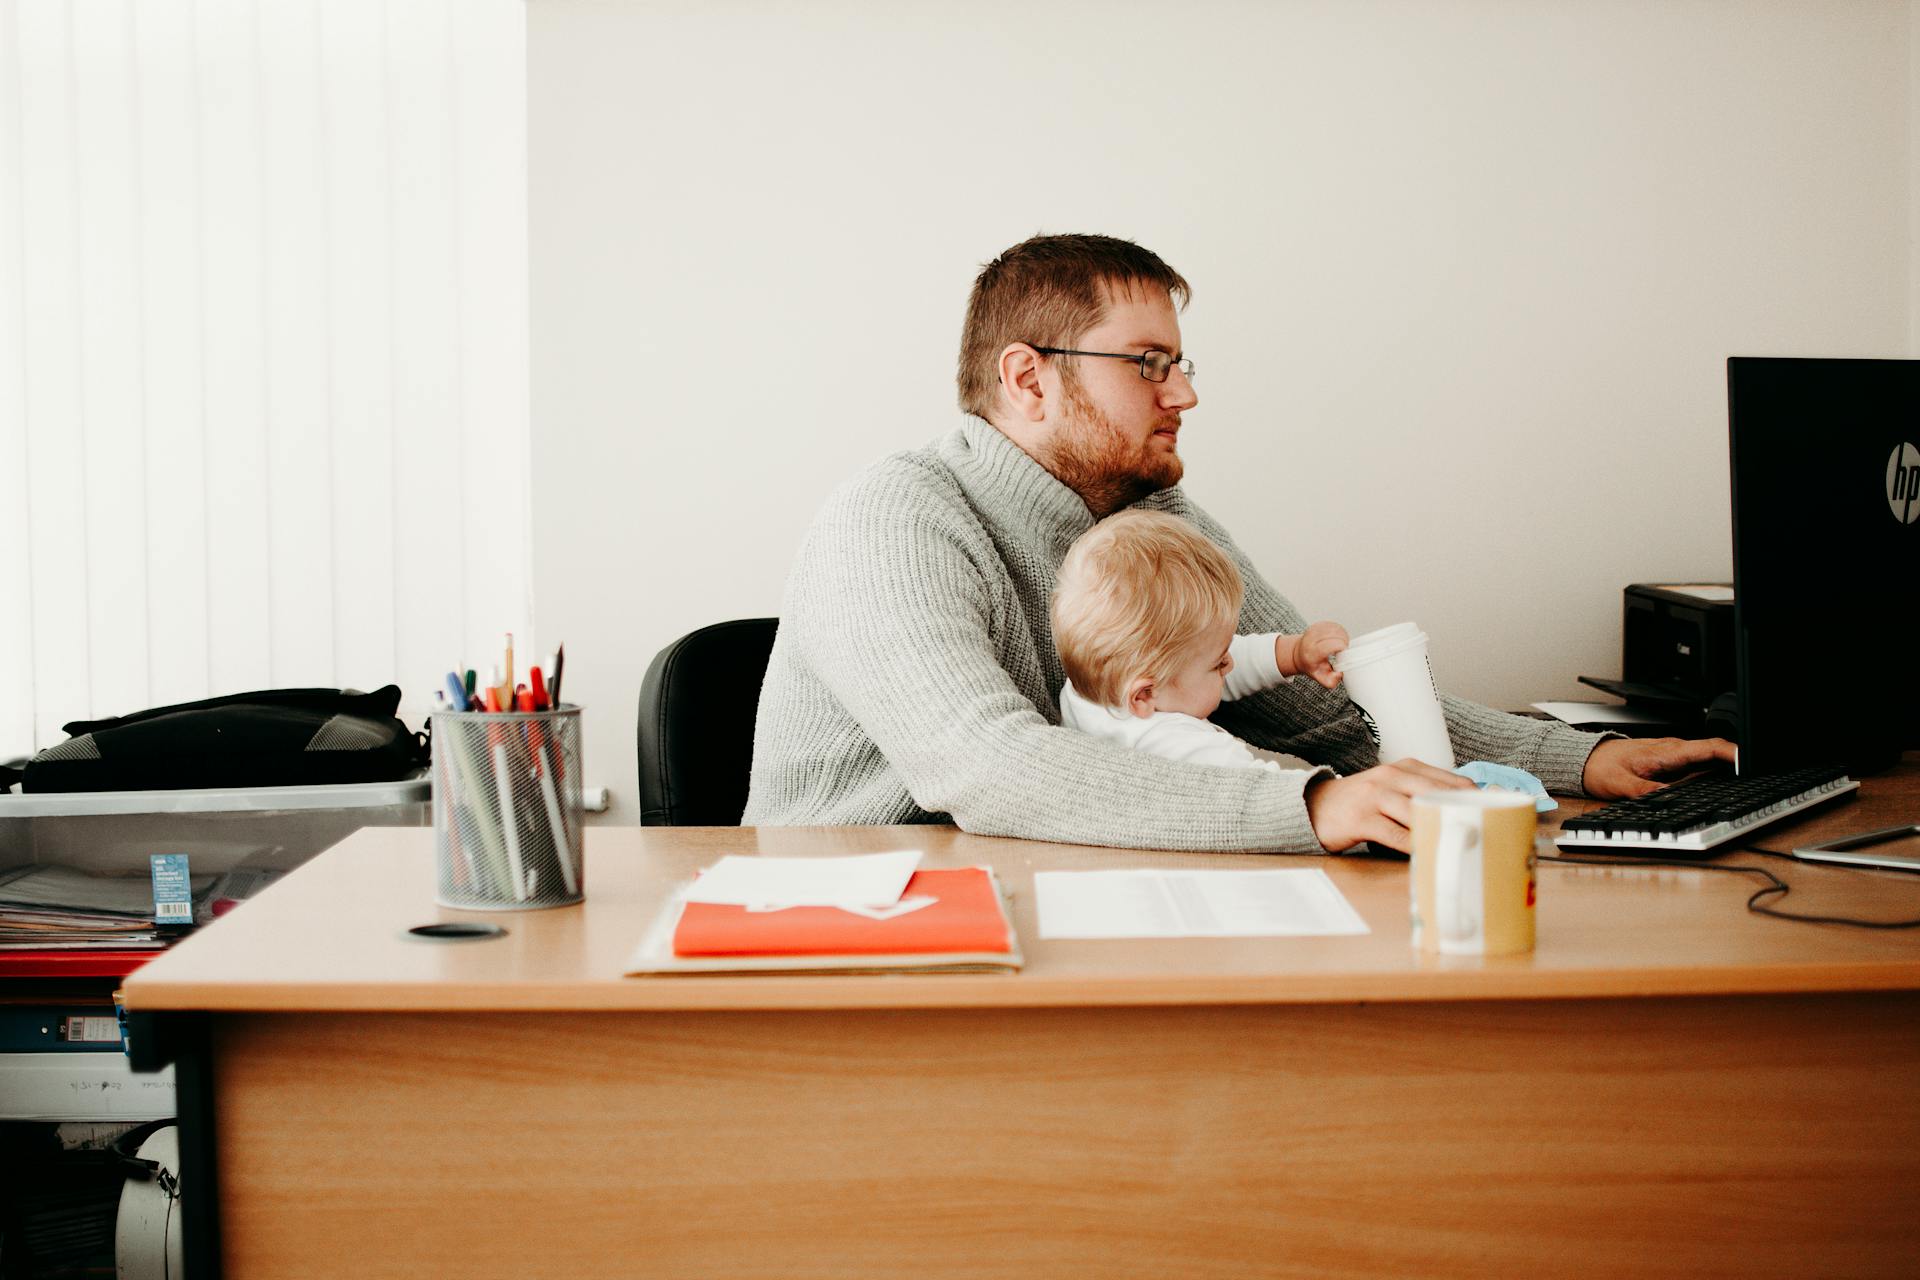 A man taking care of his son while working | Source: Pexels